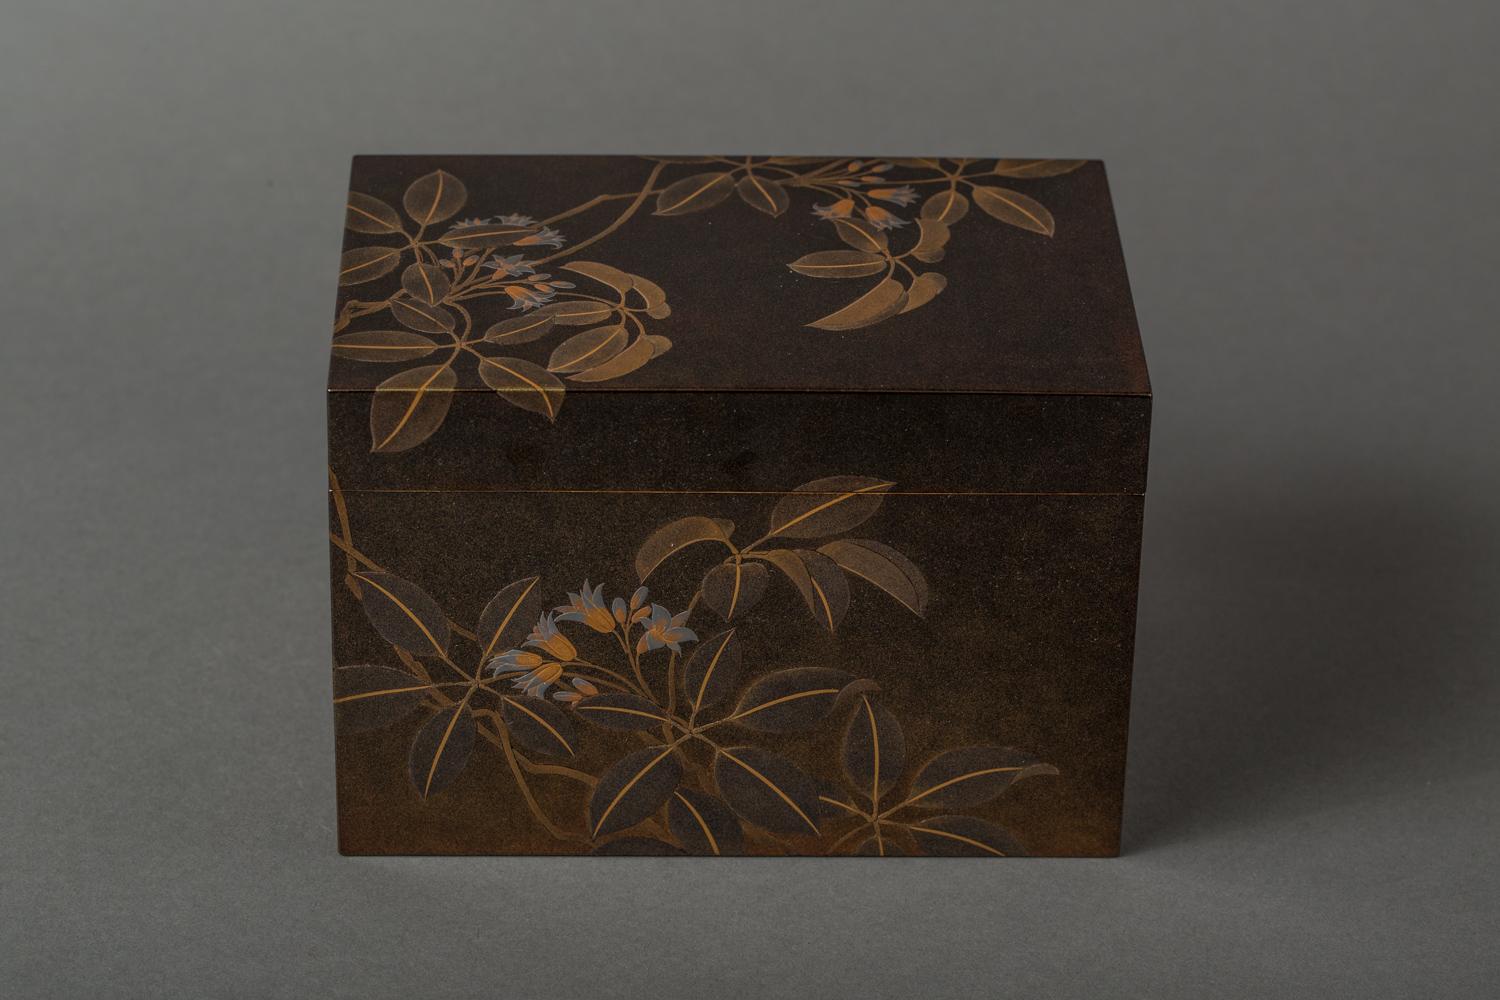 19th Century Japanese Lacquer Tea Box 'Chabako' with Flower Design For Sale